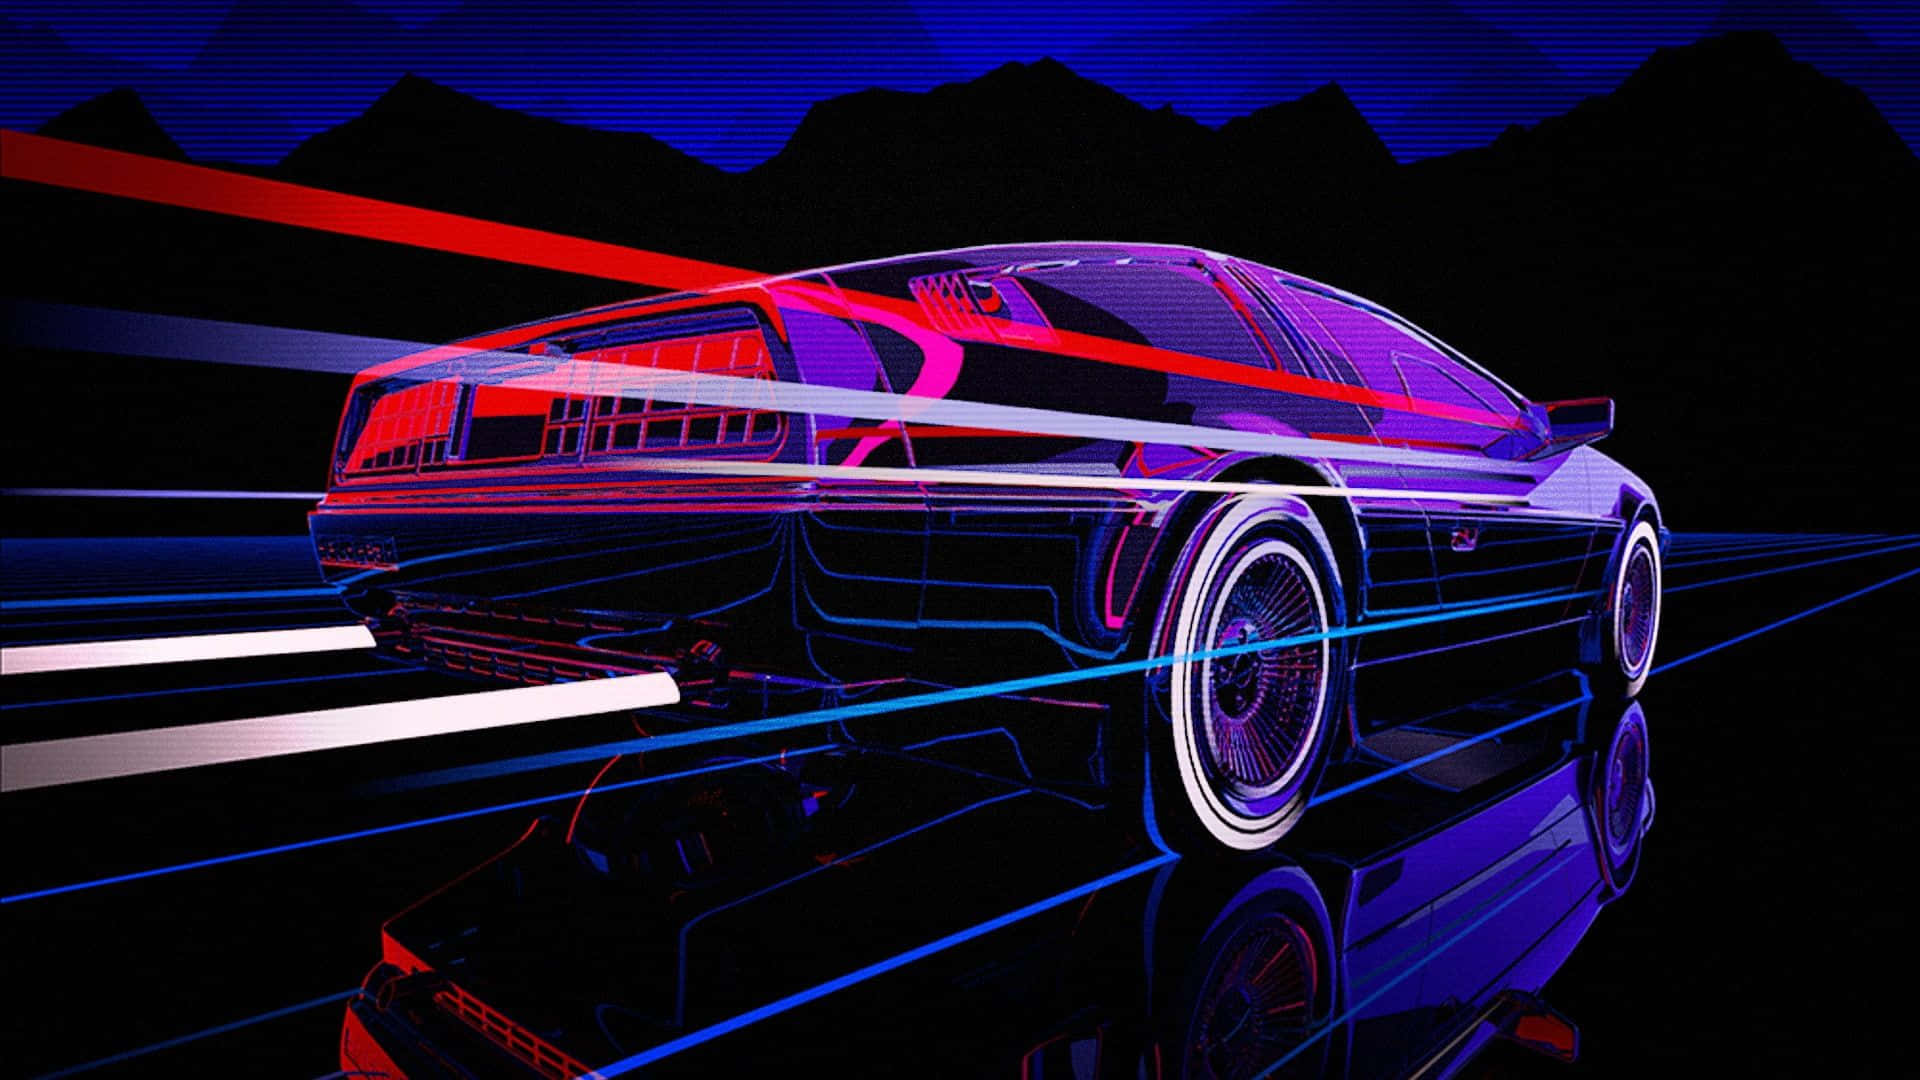 Turn Up the Heat With 80s Neon Wallpaper